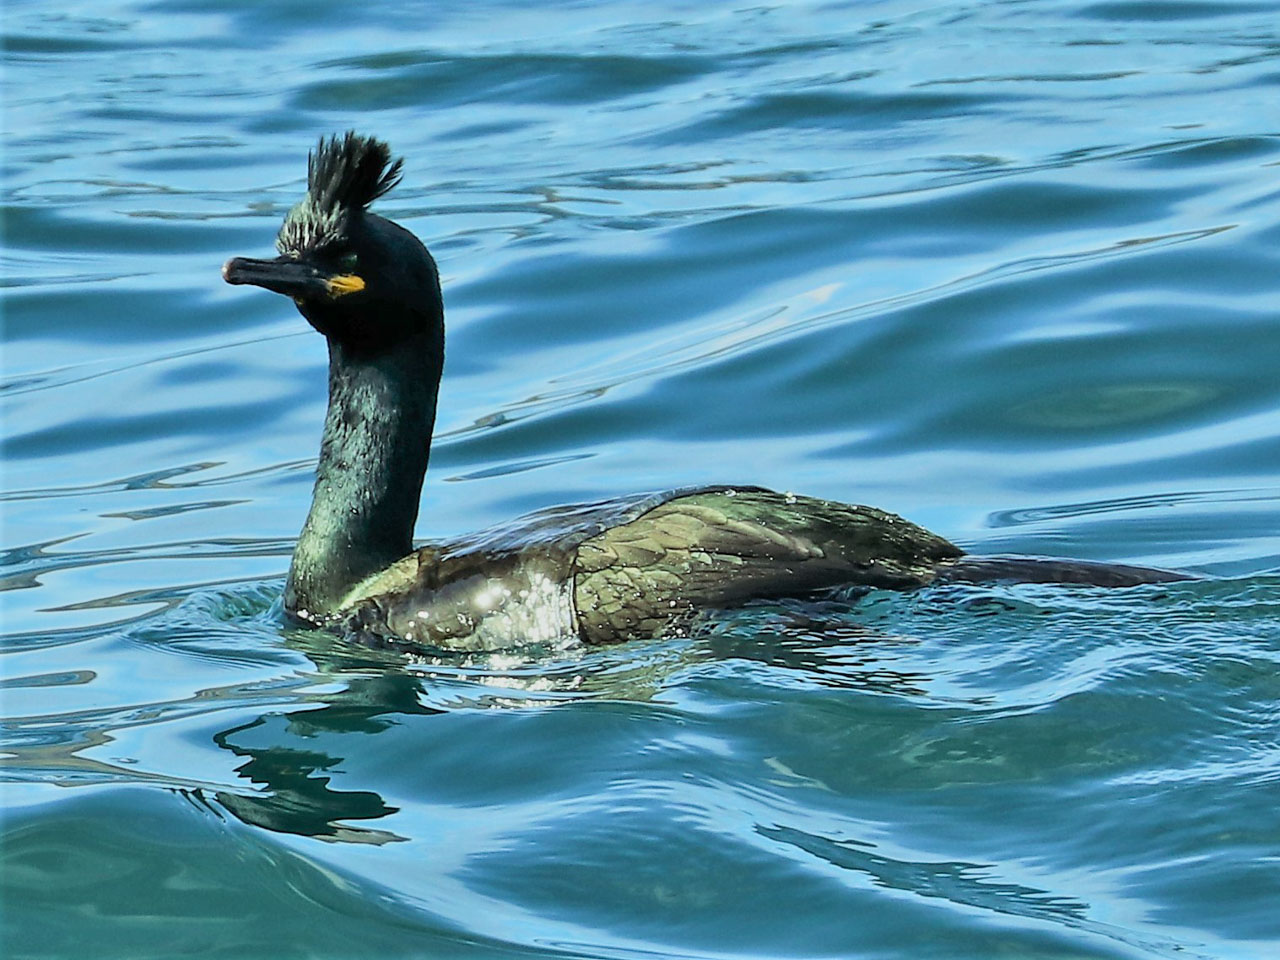 A shag in full breeding plumage complete with breeding crest